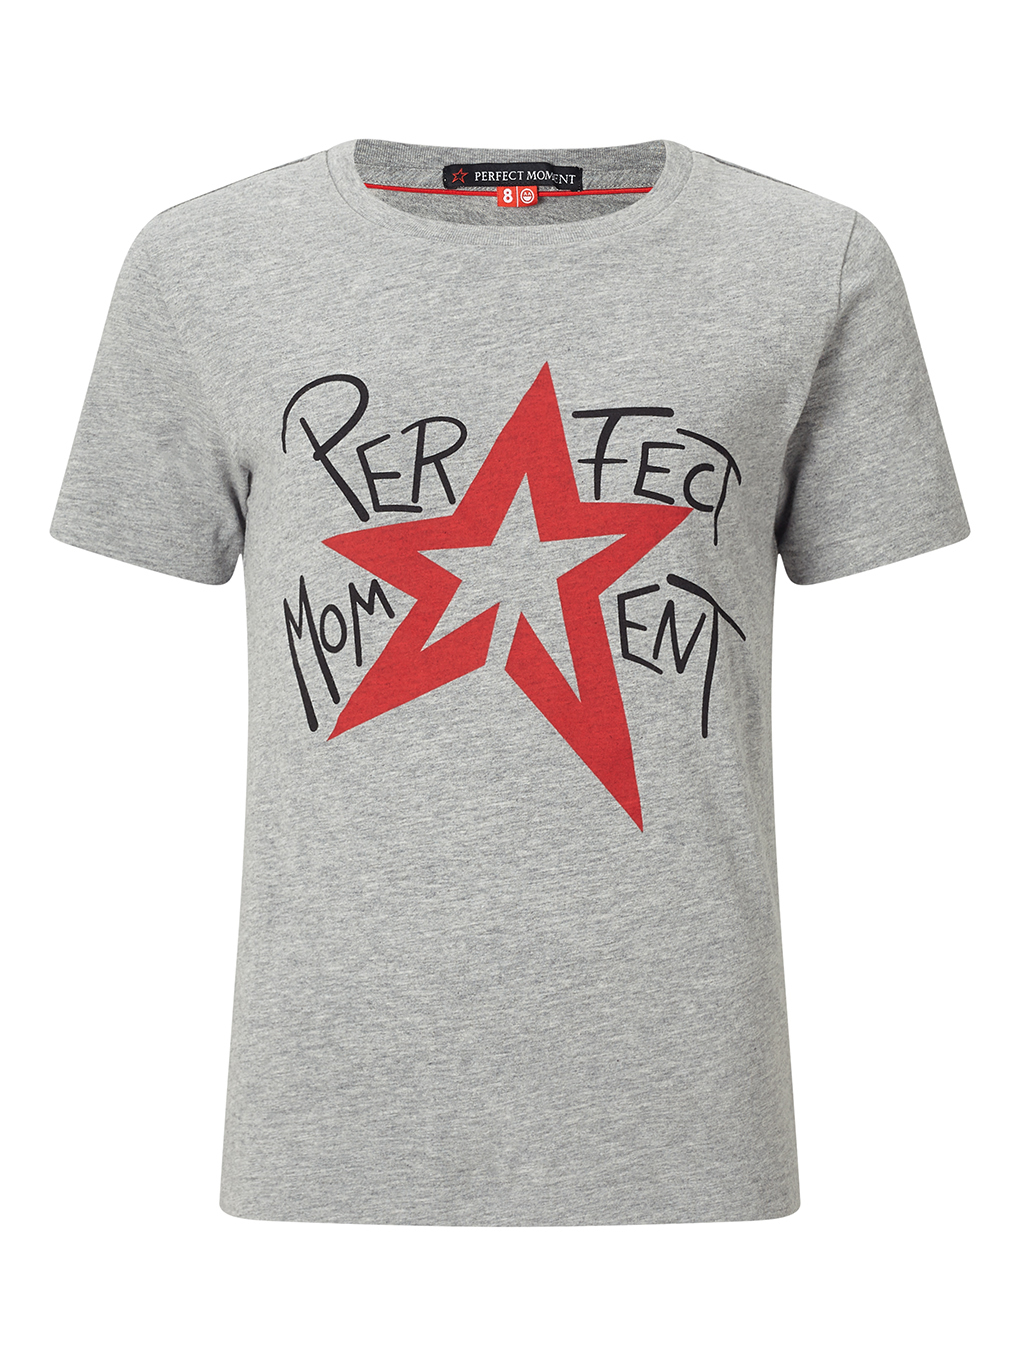 Perfect Moment Star Tee Y8 In Grey